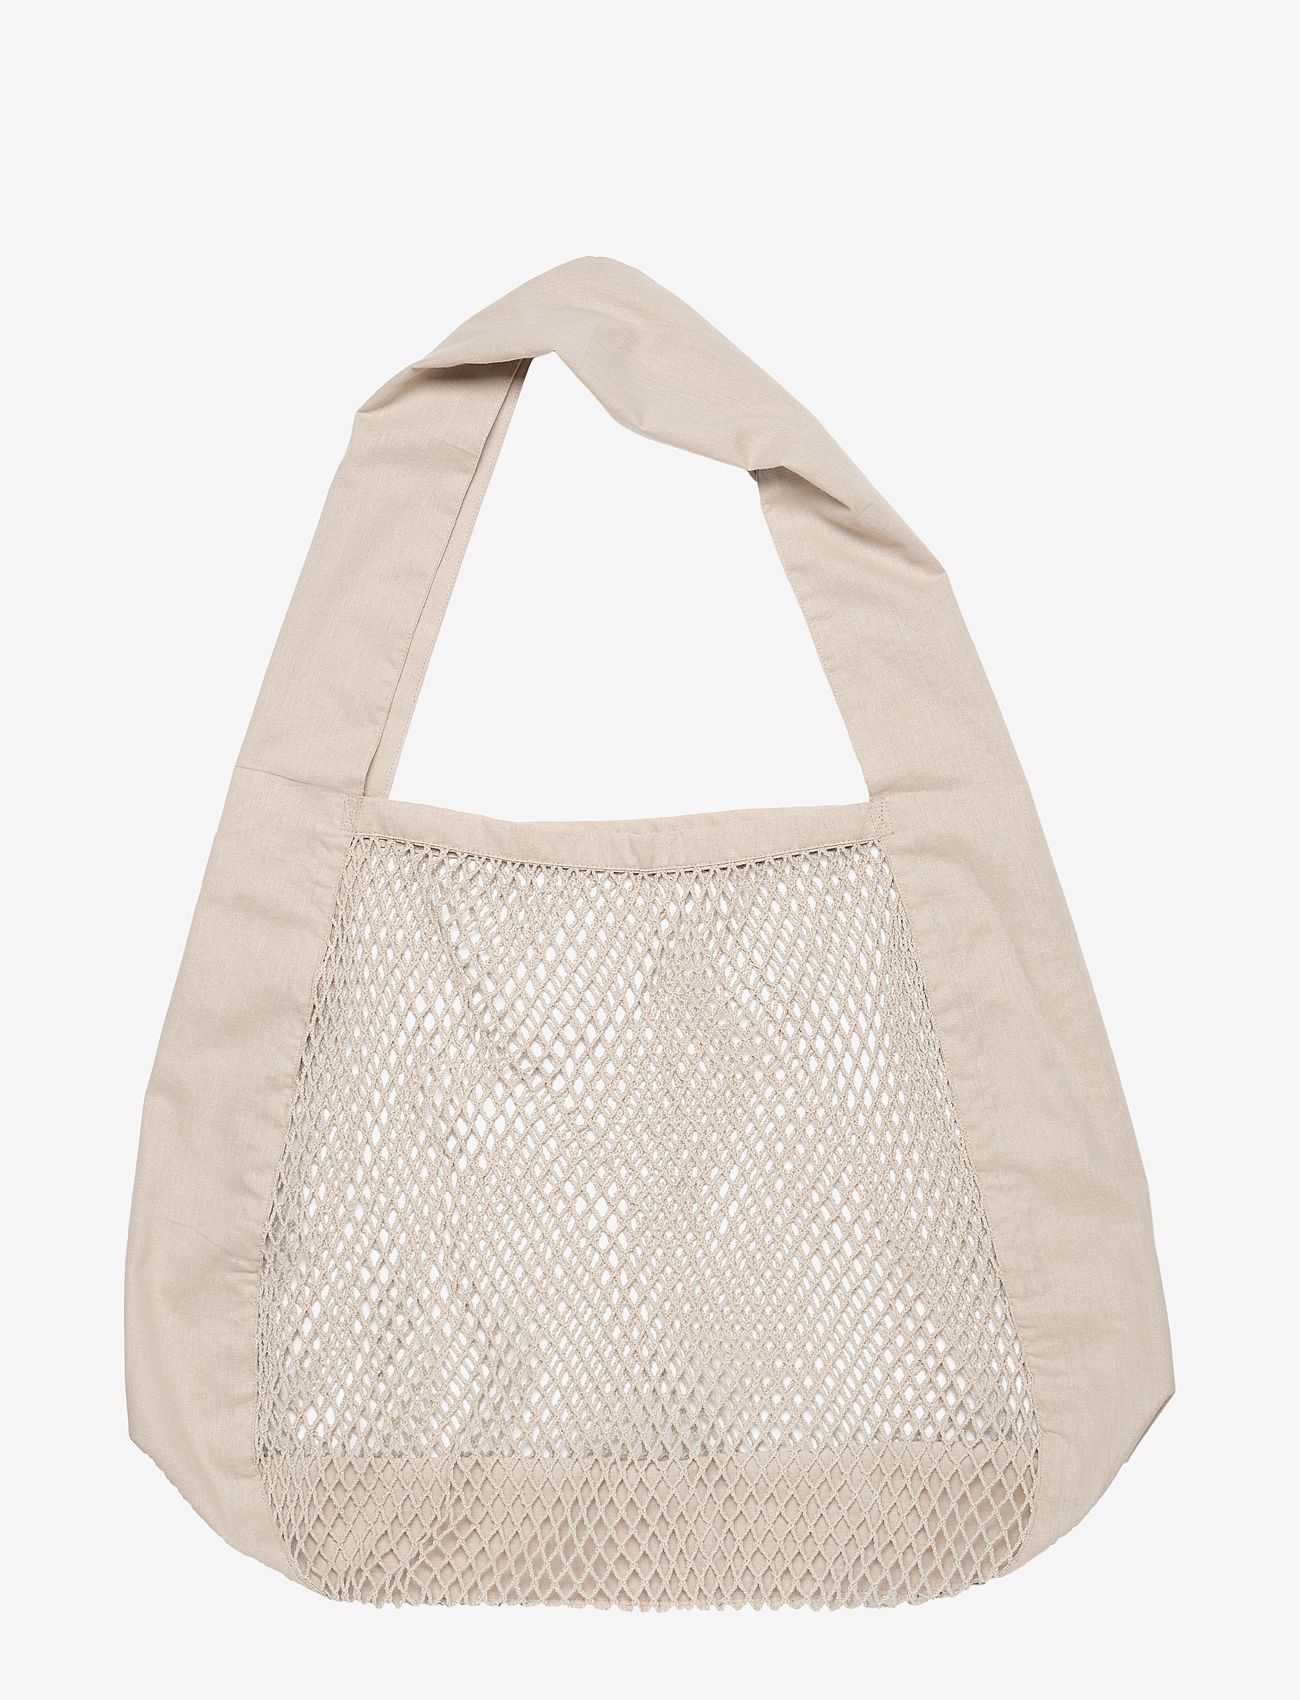 The Organic Company - Net shoulder bag - tote bags - 202 stone - 1